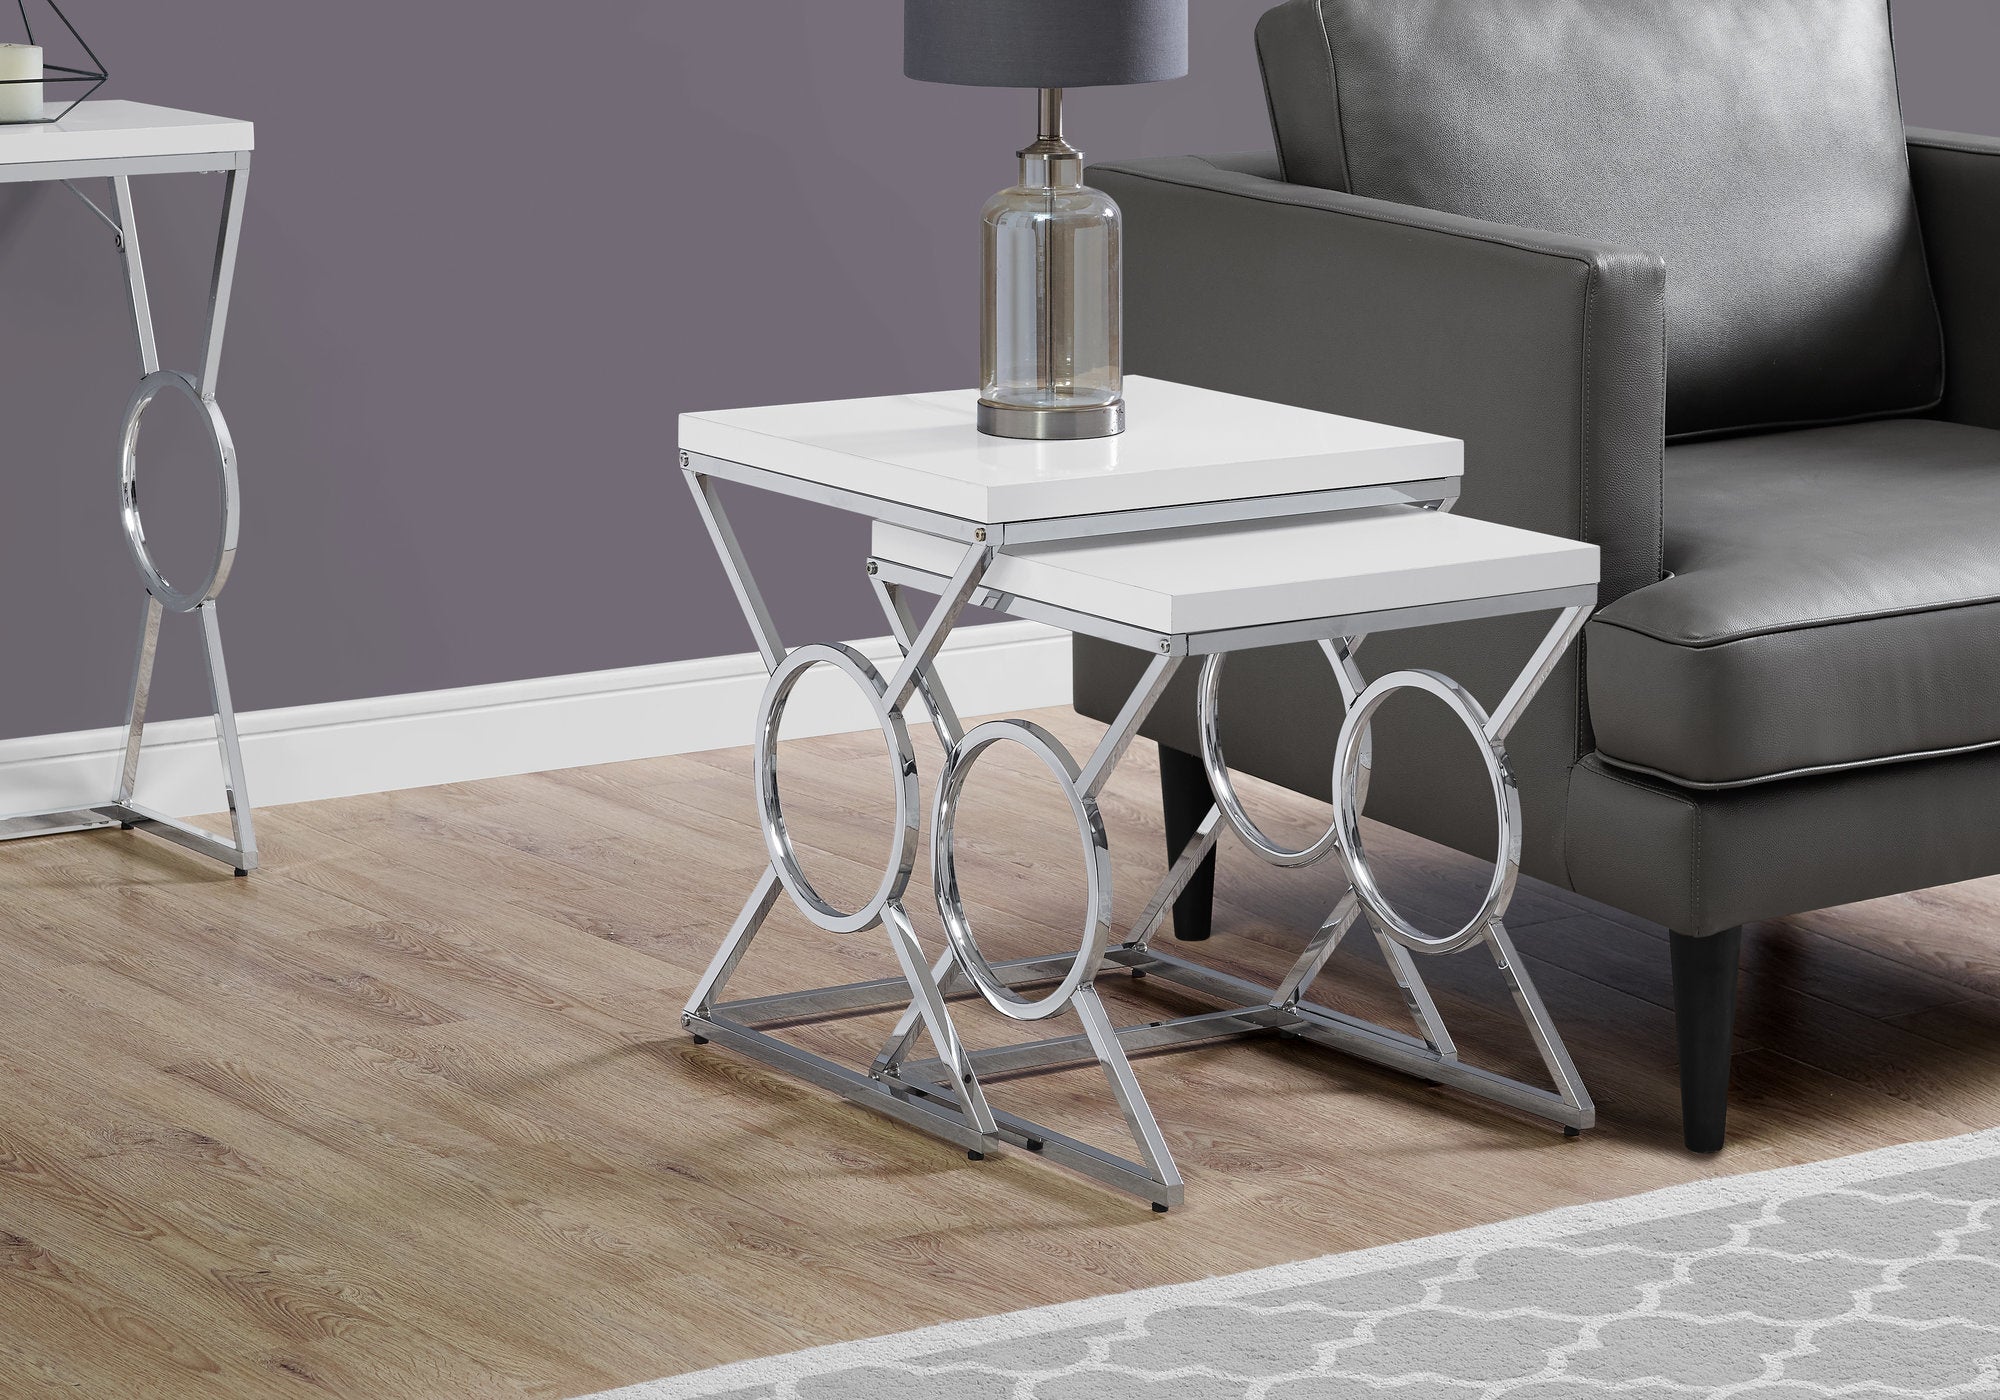 MN-443401    Nesting Table, Set Of 2, Side, End, Metal, Accent, Living Room, Bedroom, Metal Base, Laminate, Glossy White, Chrome, Contemporary, Modern